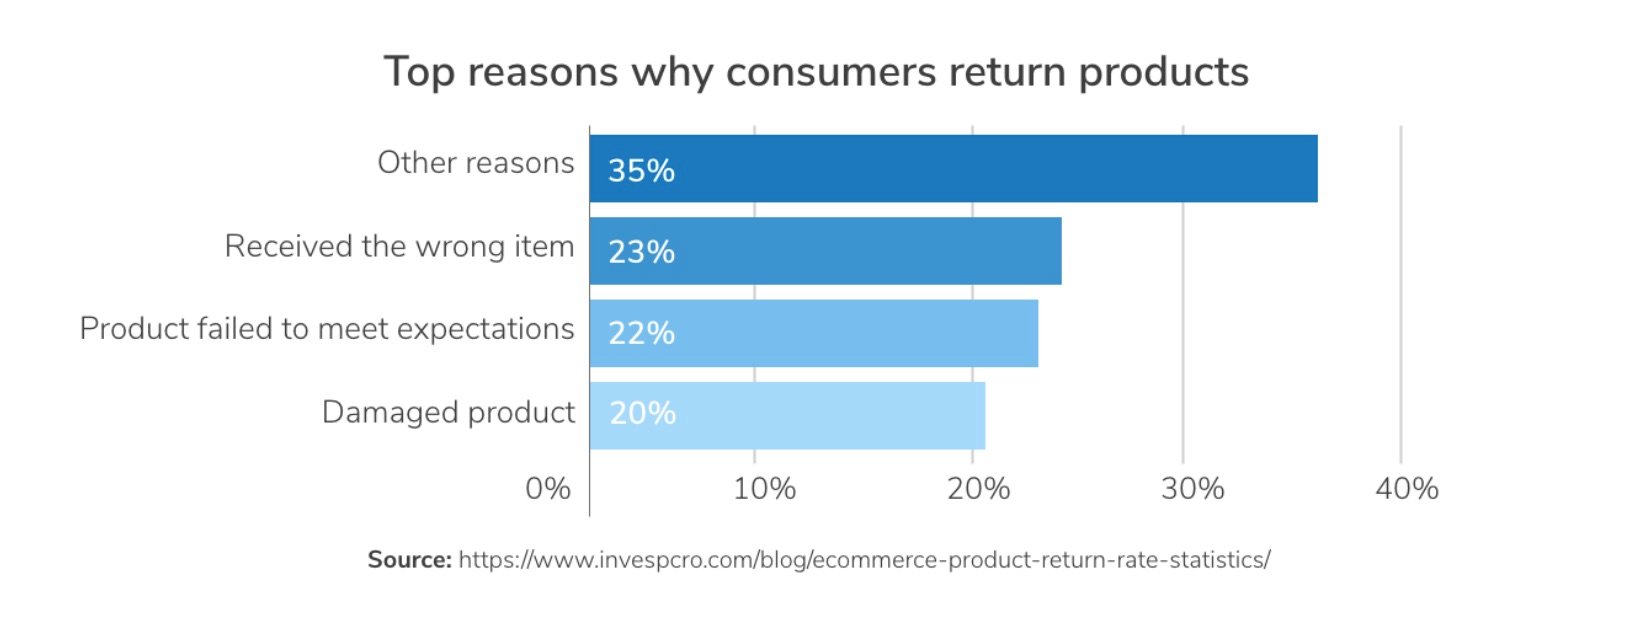 Graph showing the top reasons why consumers return products according to Invesp